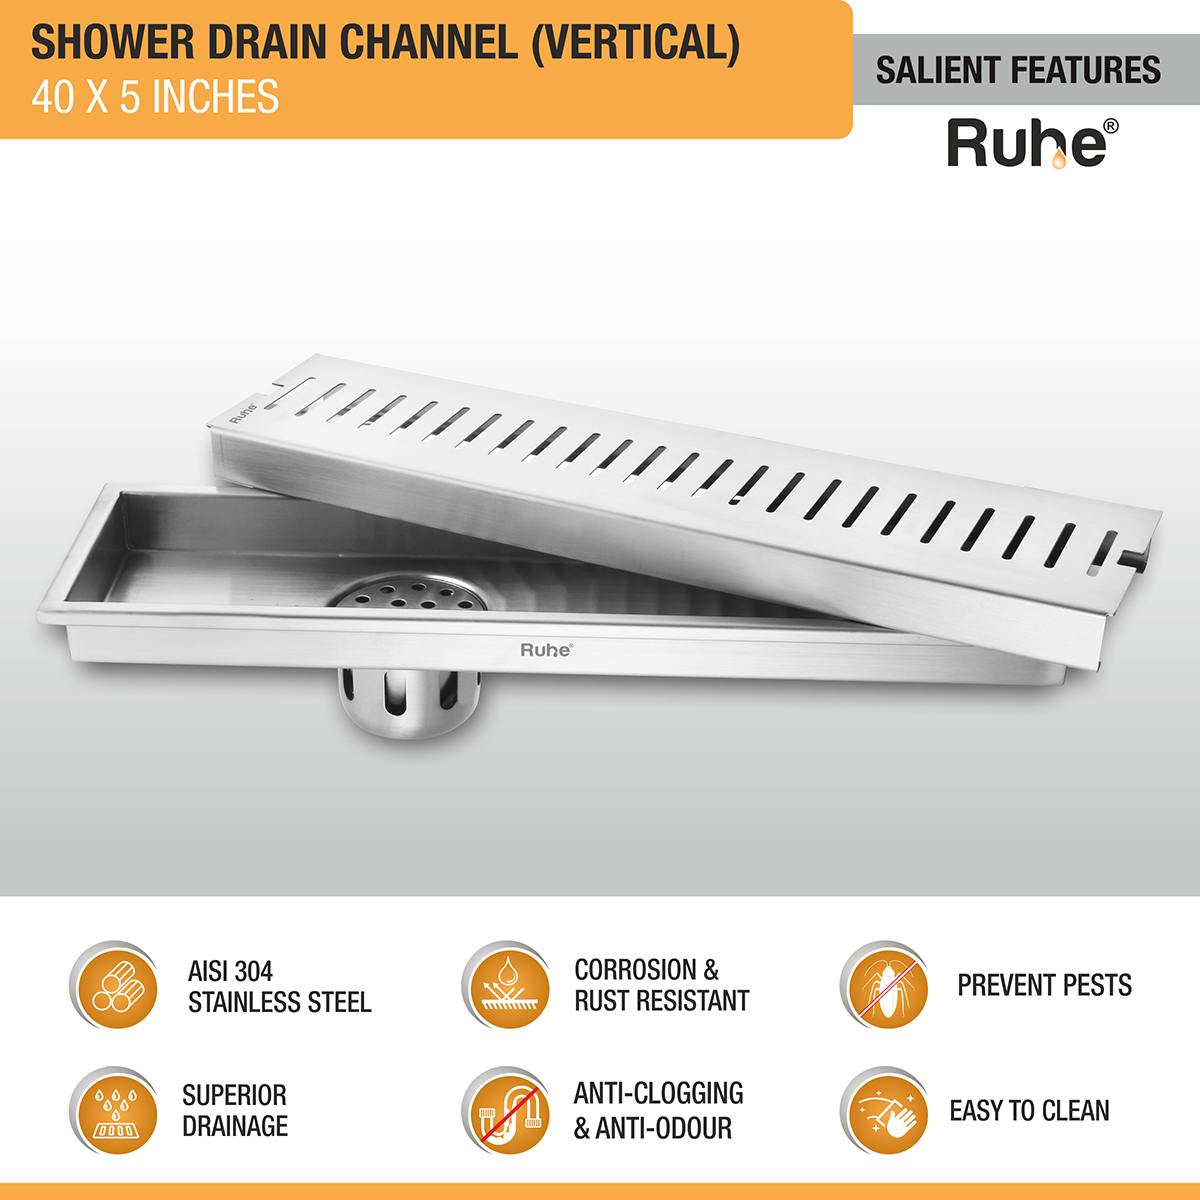 Vertical Shower Drain Channel (40 x 5 Inches) with Cockroach Trap (304 Grade) features